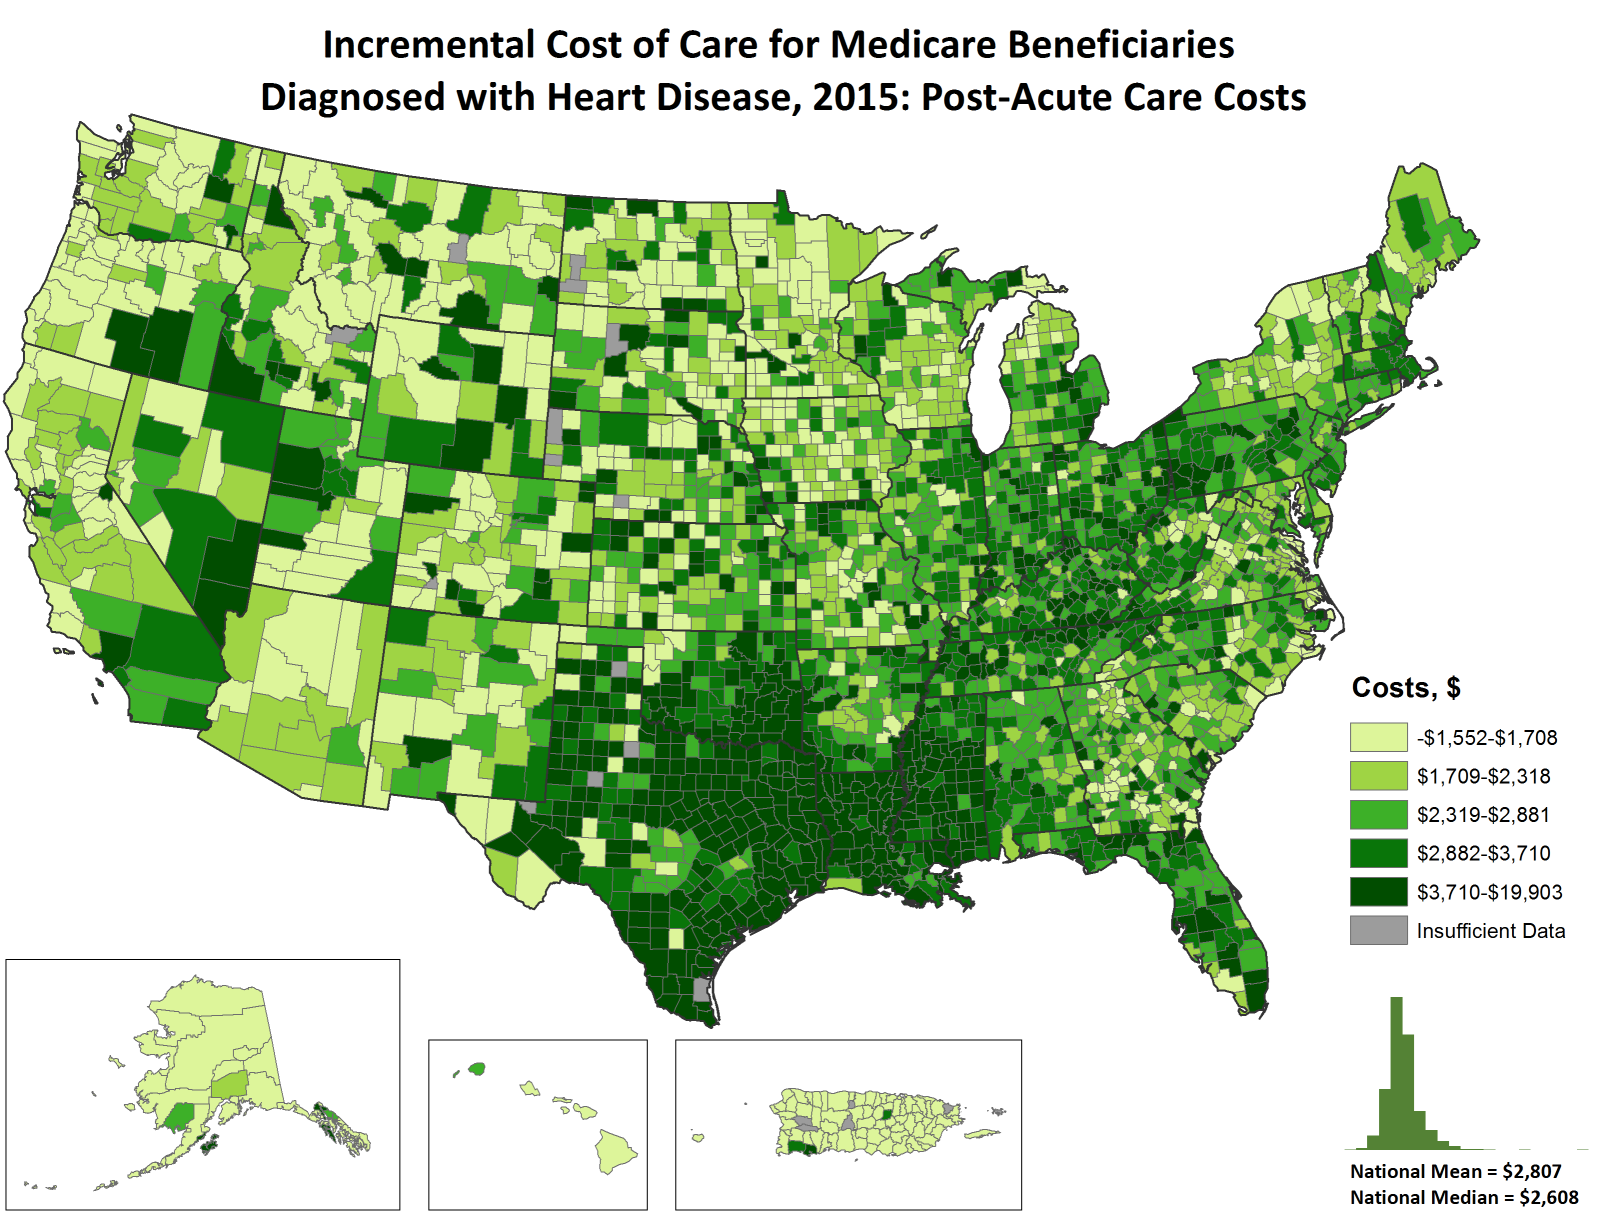 Incremental Costs of Care per Capita for FFS Medicare beneficiaries diagnosed with Heart Disease, 2015: Post Acute Care Costs, by county. This map shows the concentrations of counties with the highest incremental post acute care costs per capita – meaning the top quintile – are located primarily in Texas, Oklahoma, Louisiana, and Mississippi, with pockets located in southeastern Oregon, Nevada, Wyoming, Pennsylvania, Florida, Tennessee, and Kentucky.